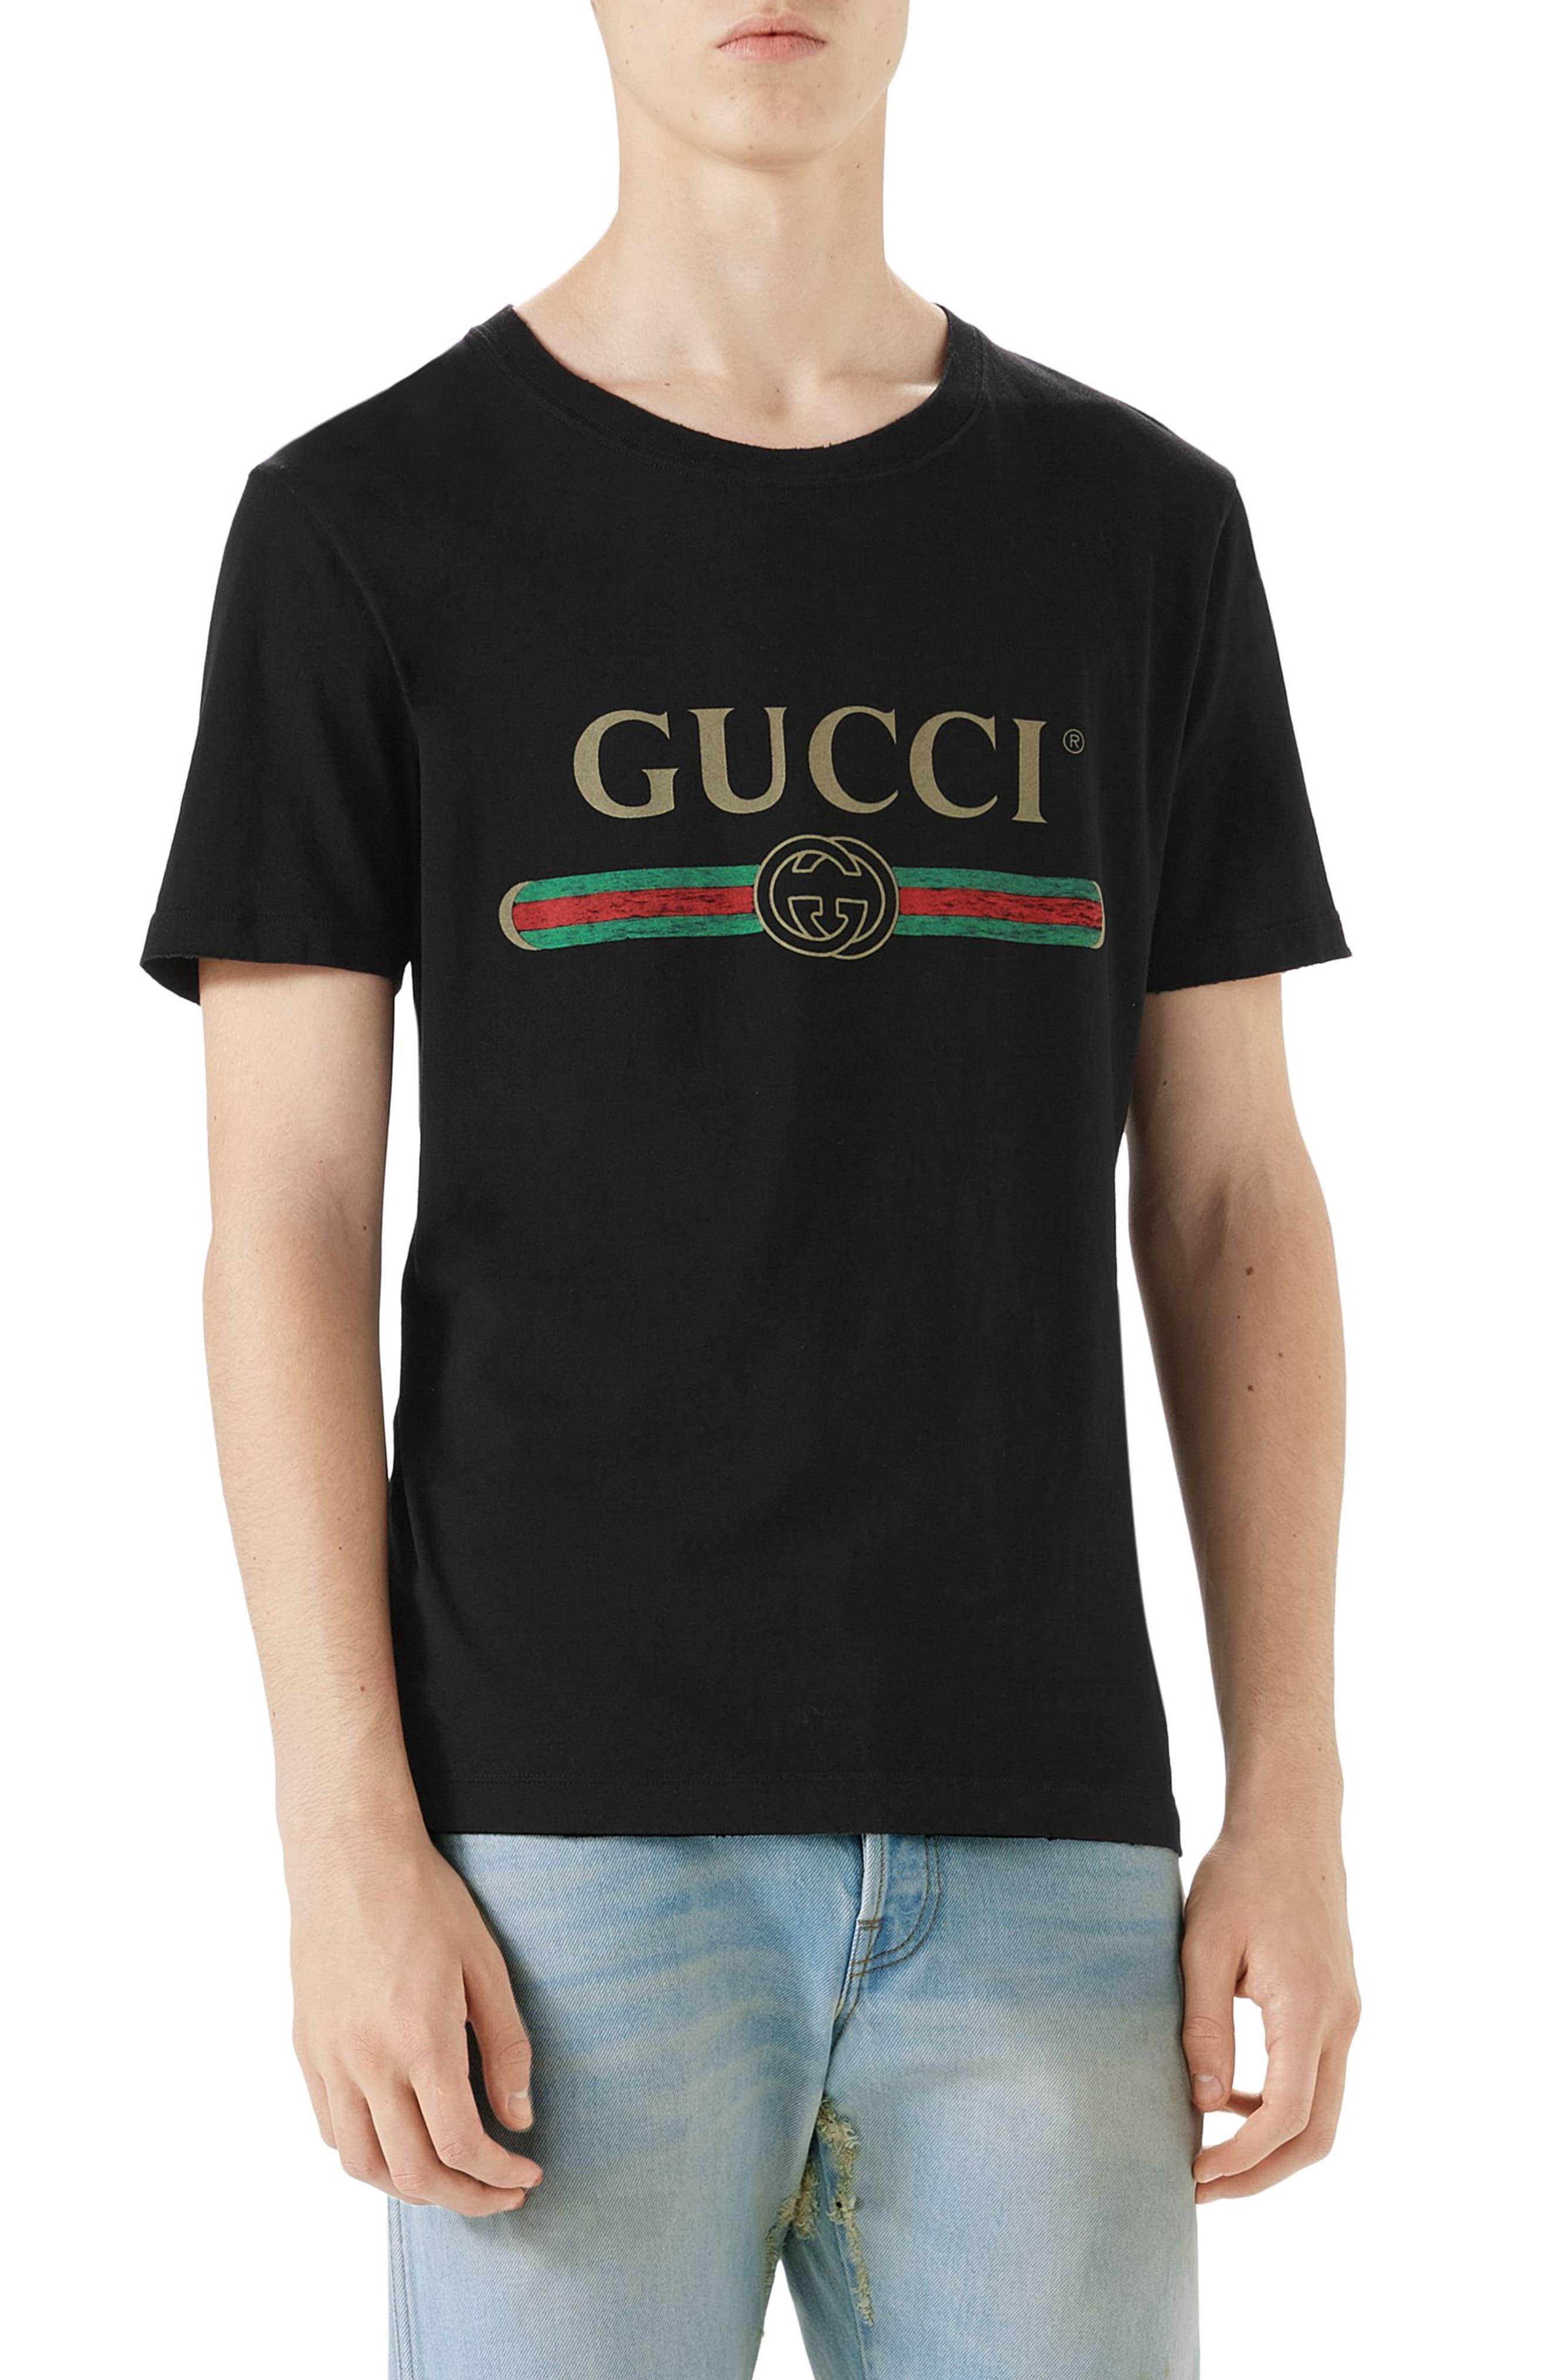 Gucci Cotton Fake Tee in Black for Men - Save 29% - Lyst